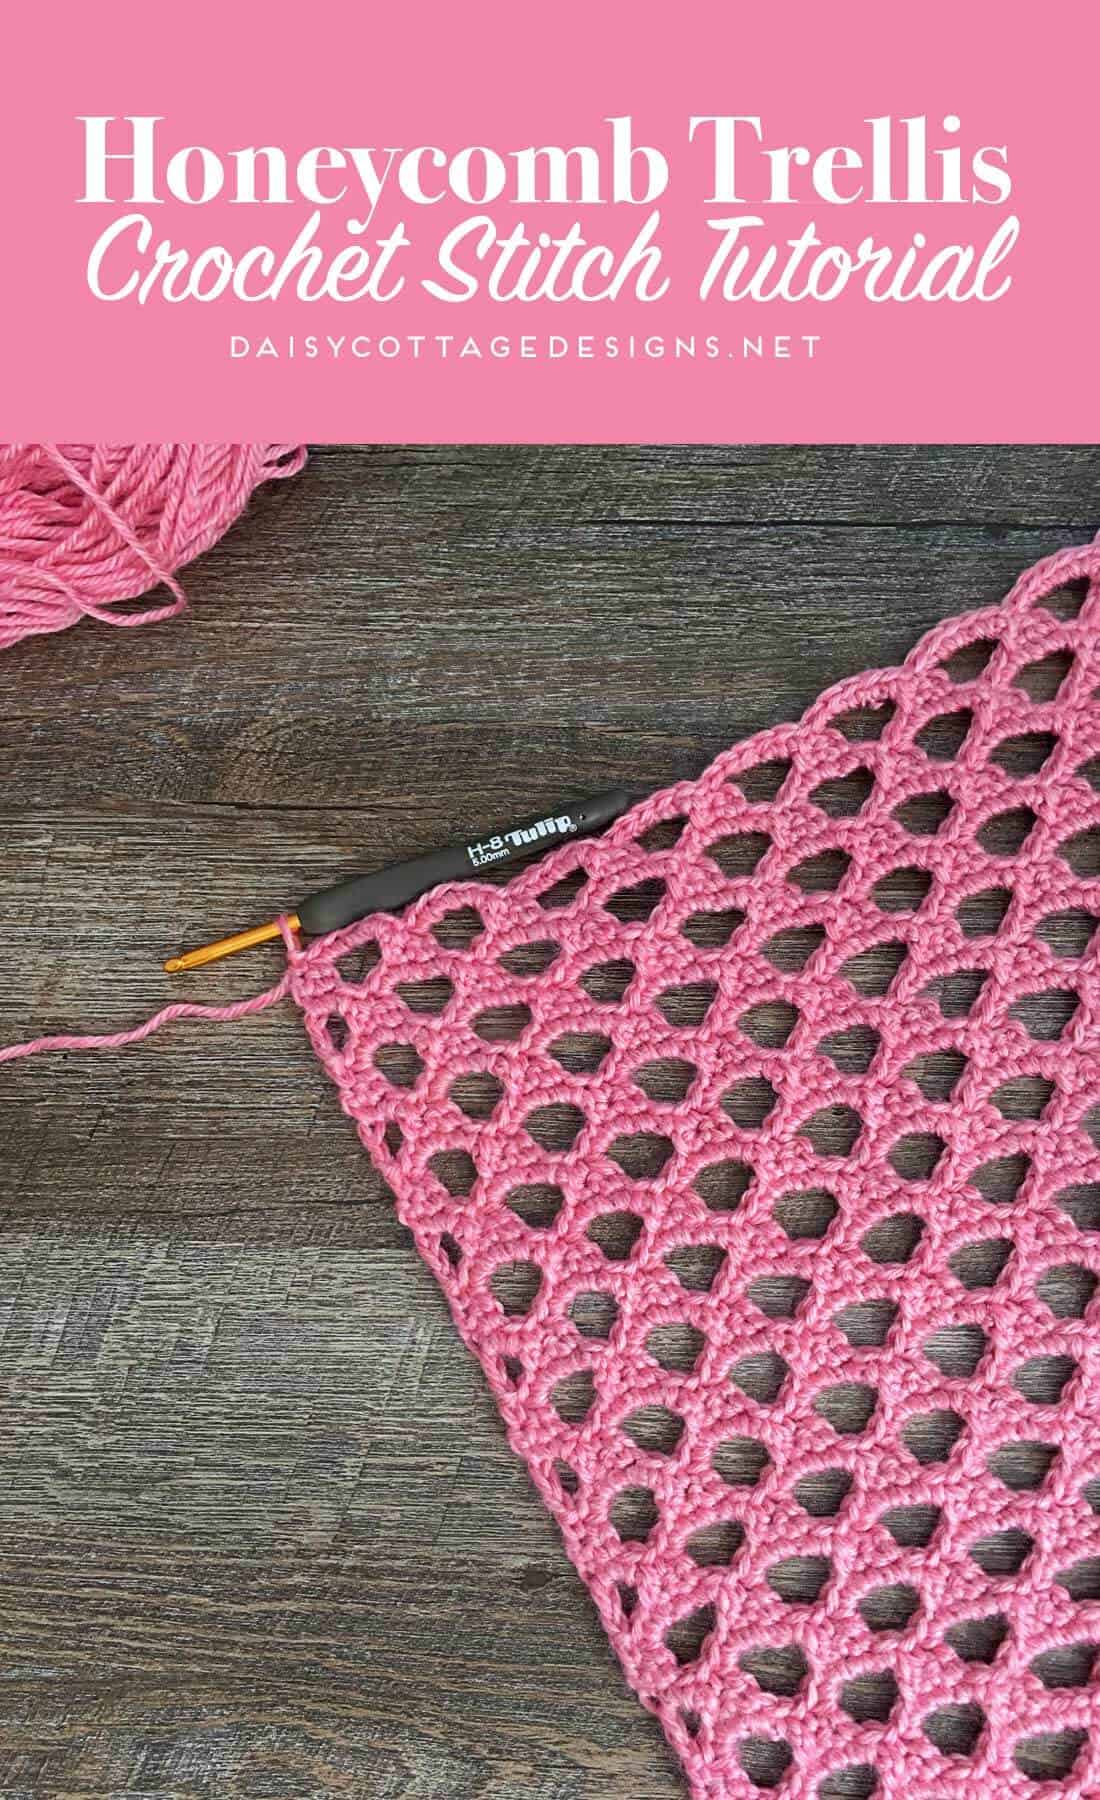 Learn how to create this beautiful open honeycomb crochet stitch with this crochet tutorial from Daisy Cottage Designs.